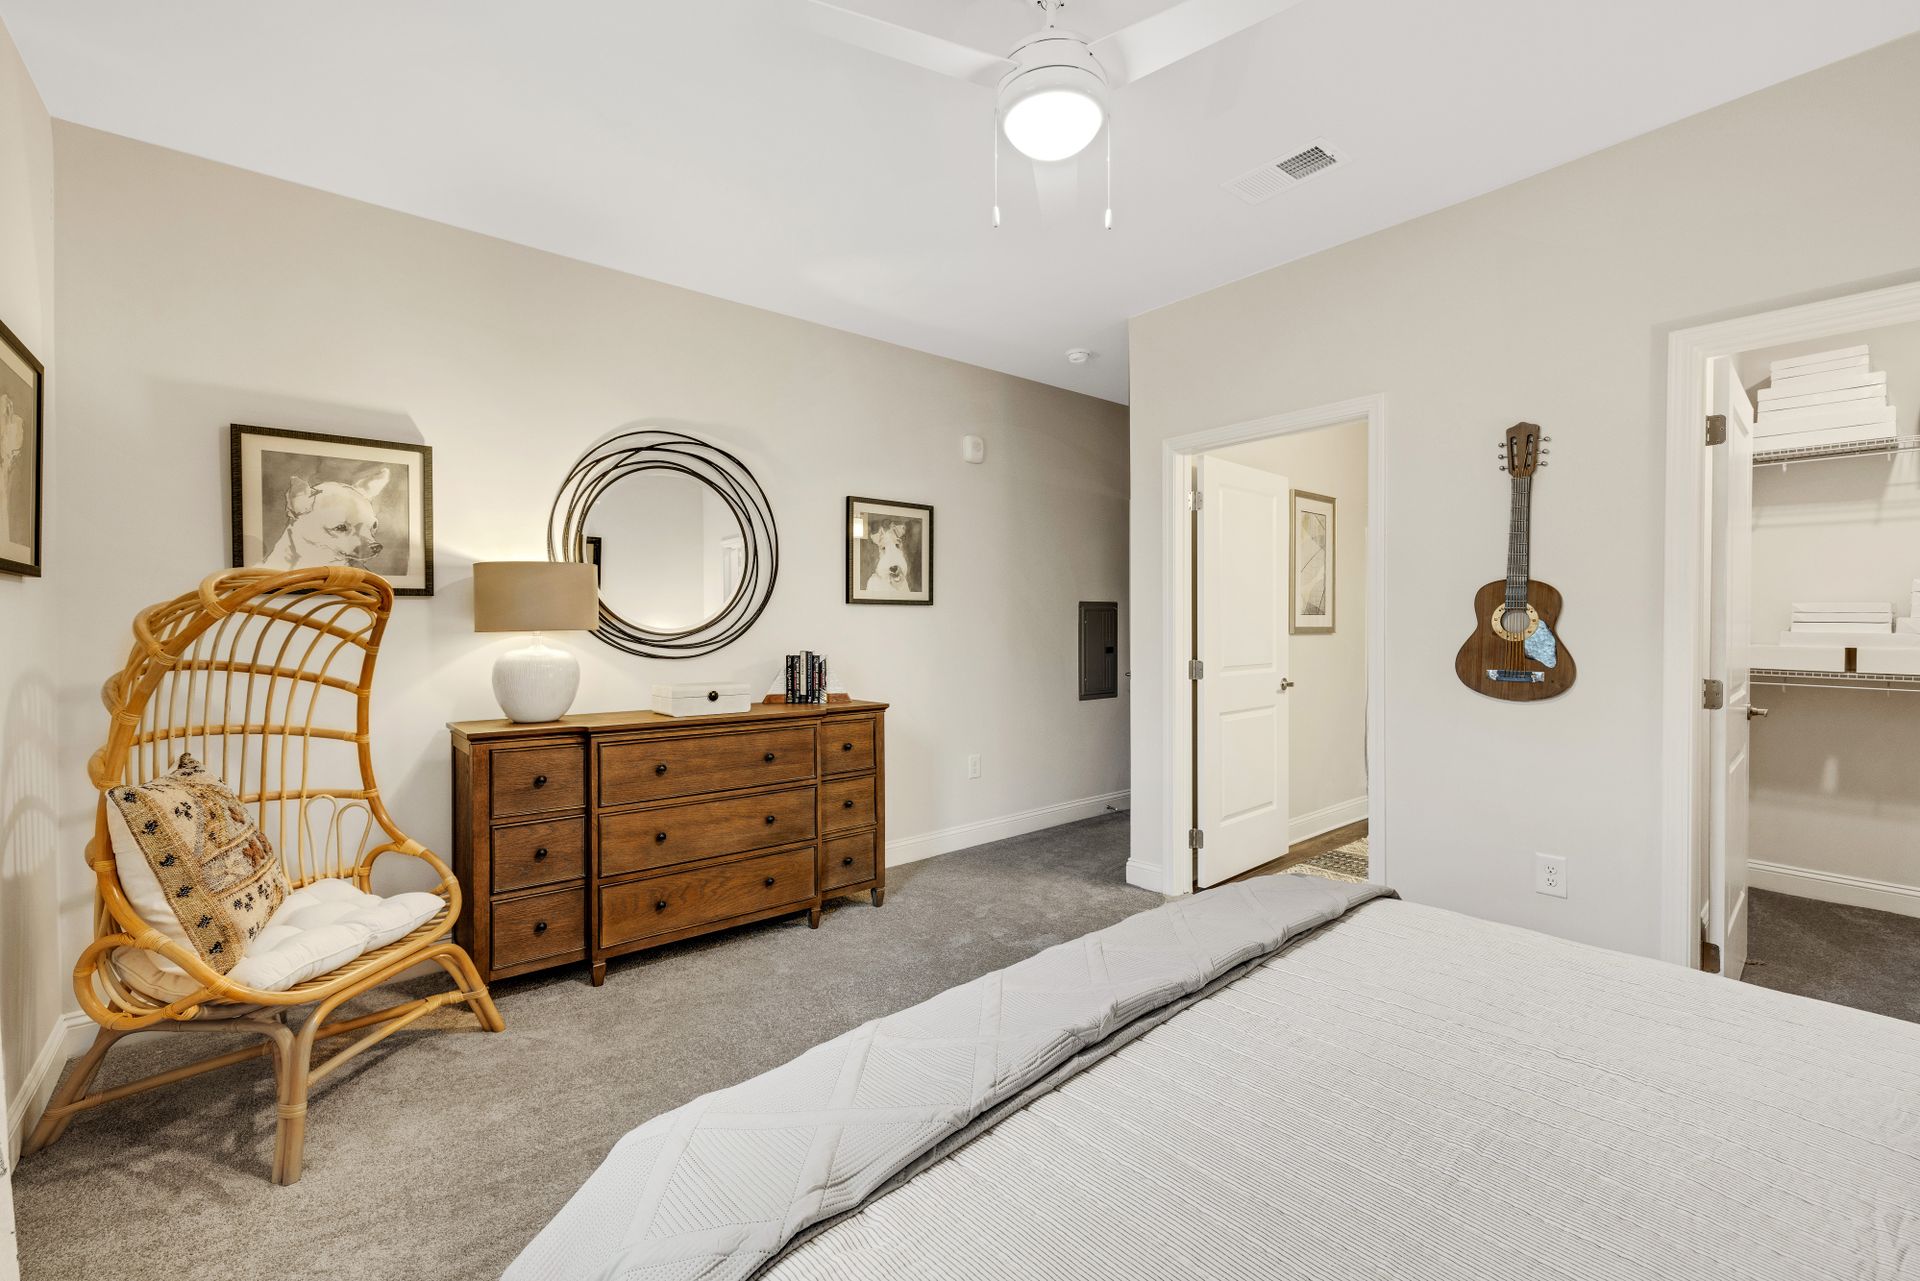 A bedroom with a bed , dresser , chair and guitar on the wall at The Standard at Pinestone. 